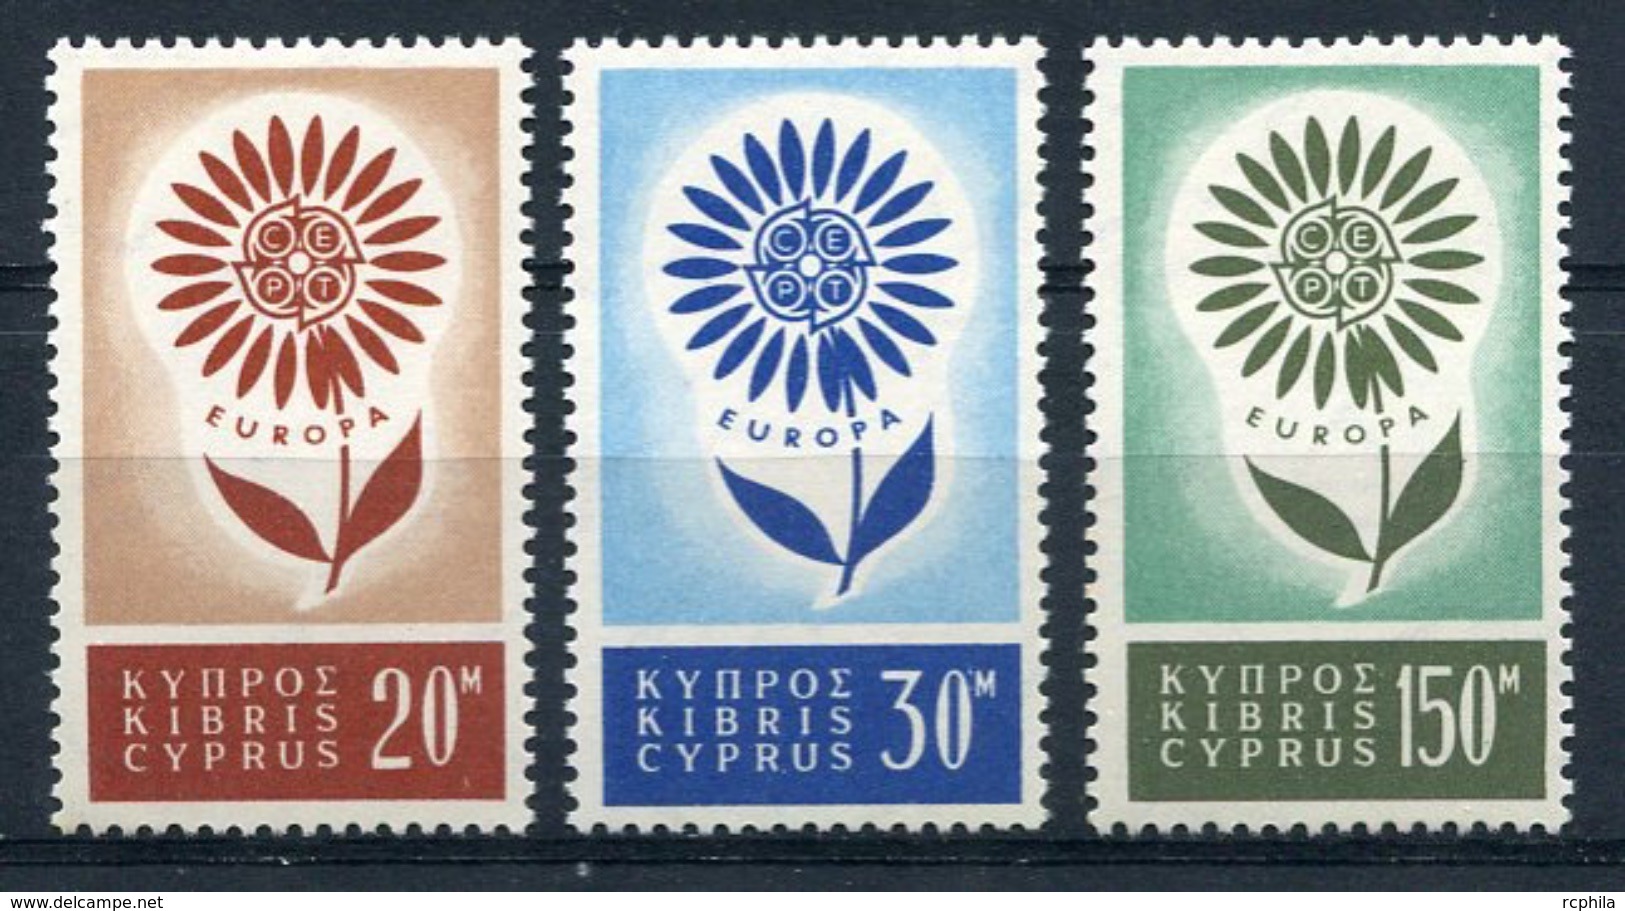 RC 8021 CHYPRE CYPRUS 232 / 234 - SERIE EUROPA 1964 COMPLÈTE COTE 60€ NEUF ** TB - Cyprus (...-1960)